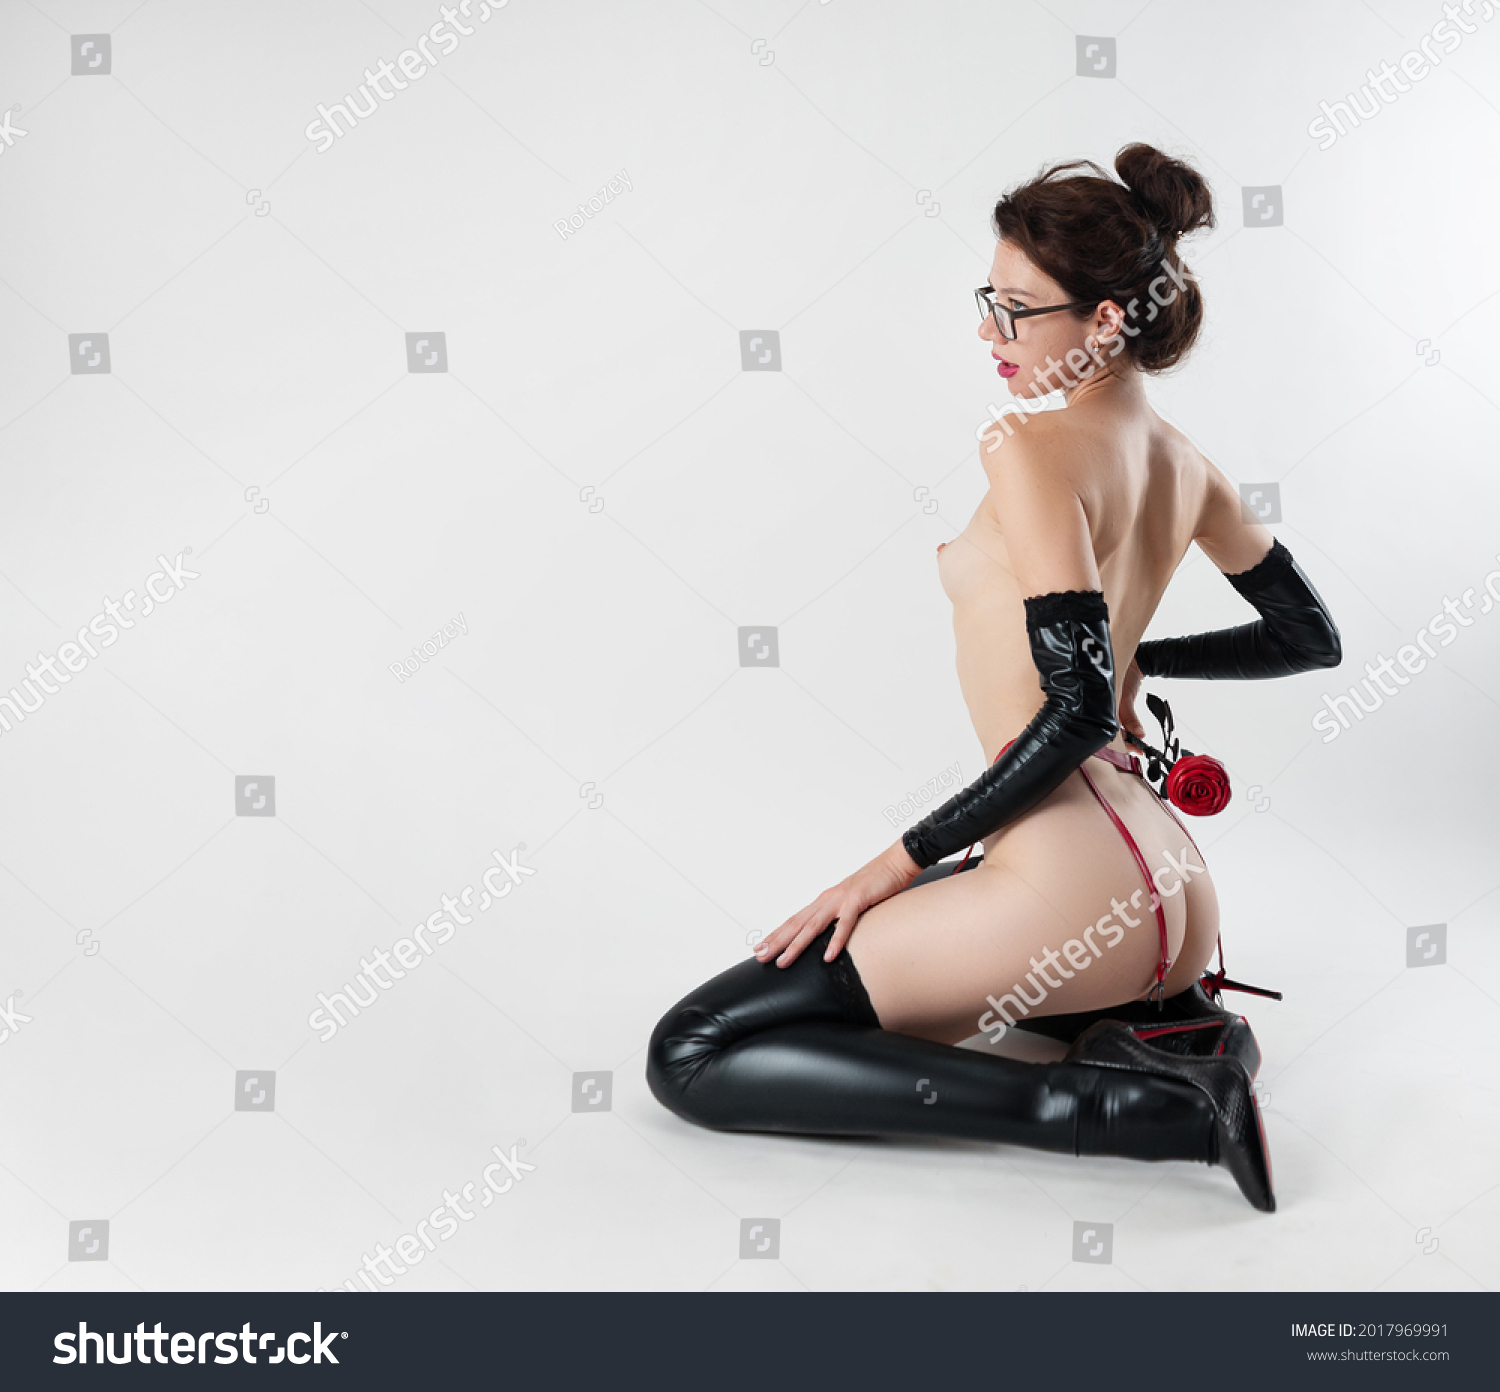 Nude women wearing stockings stock photos and pictures